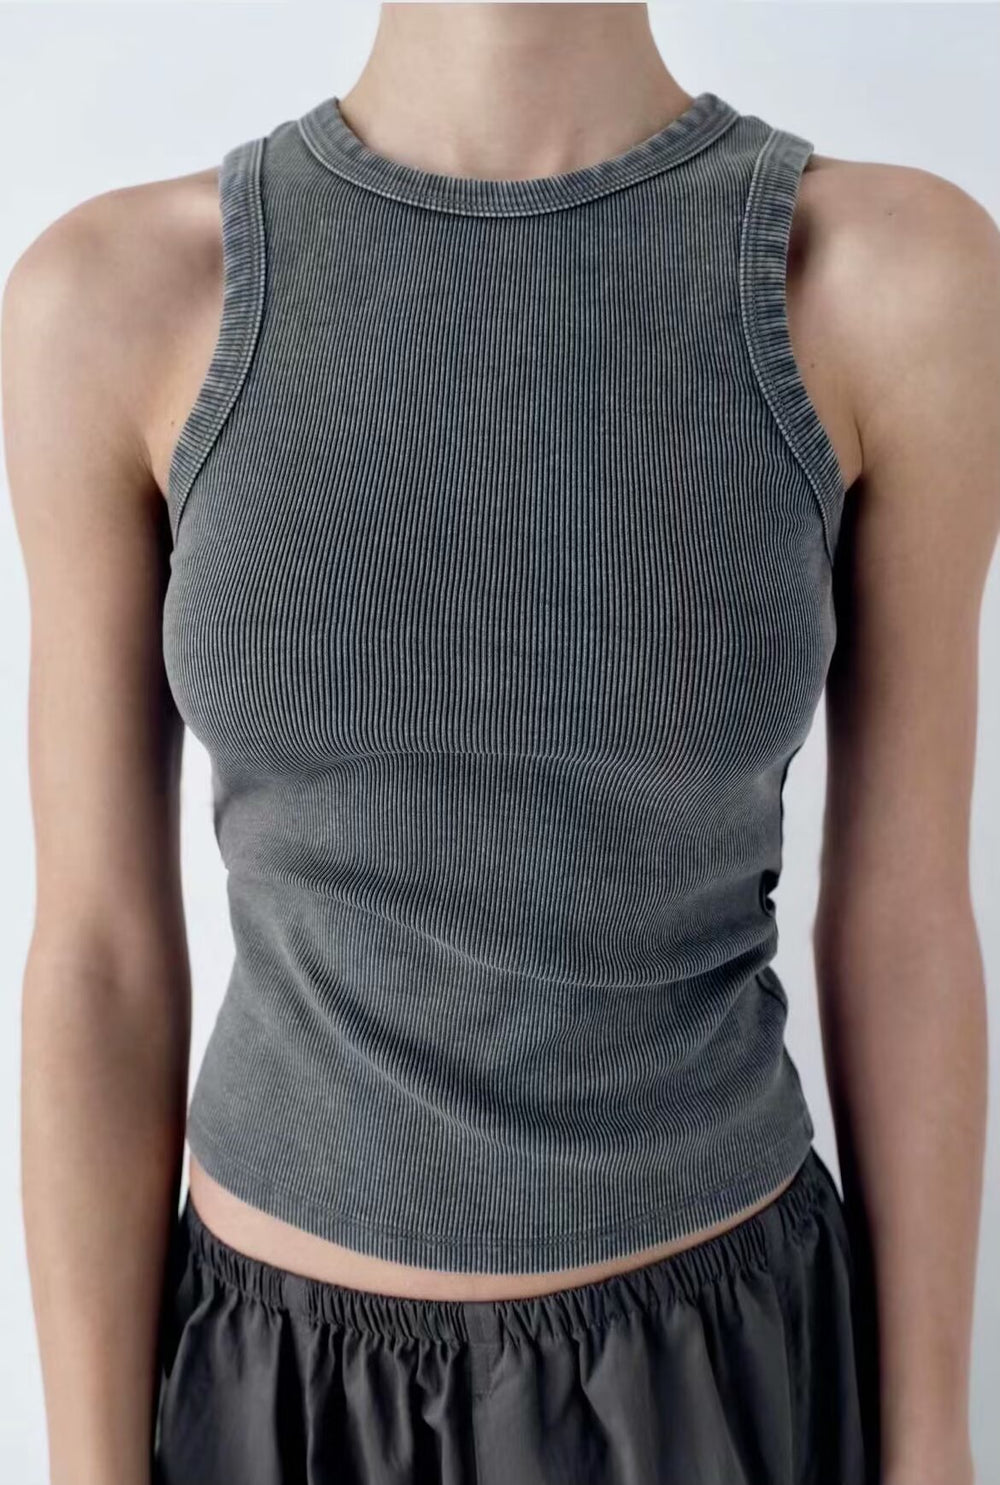 Classic Women Vest Knitted Stretch Small Sling Outerwear Bottoming Top